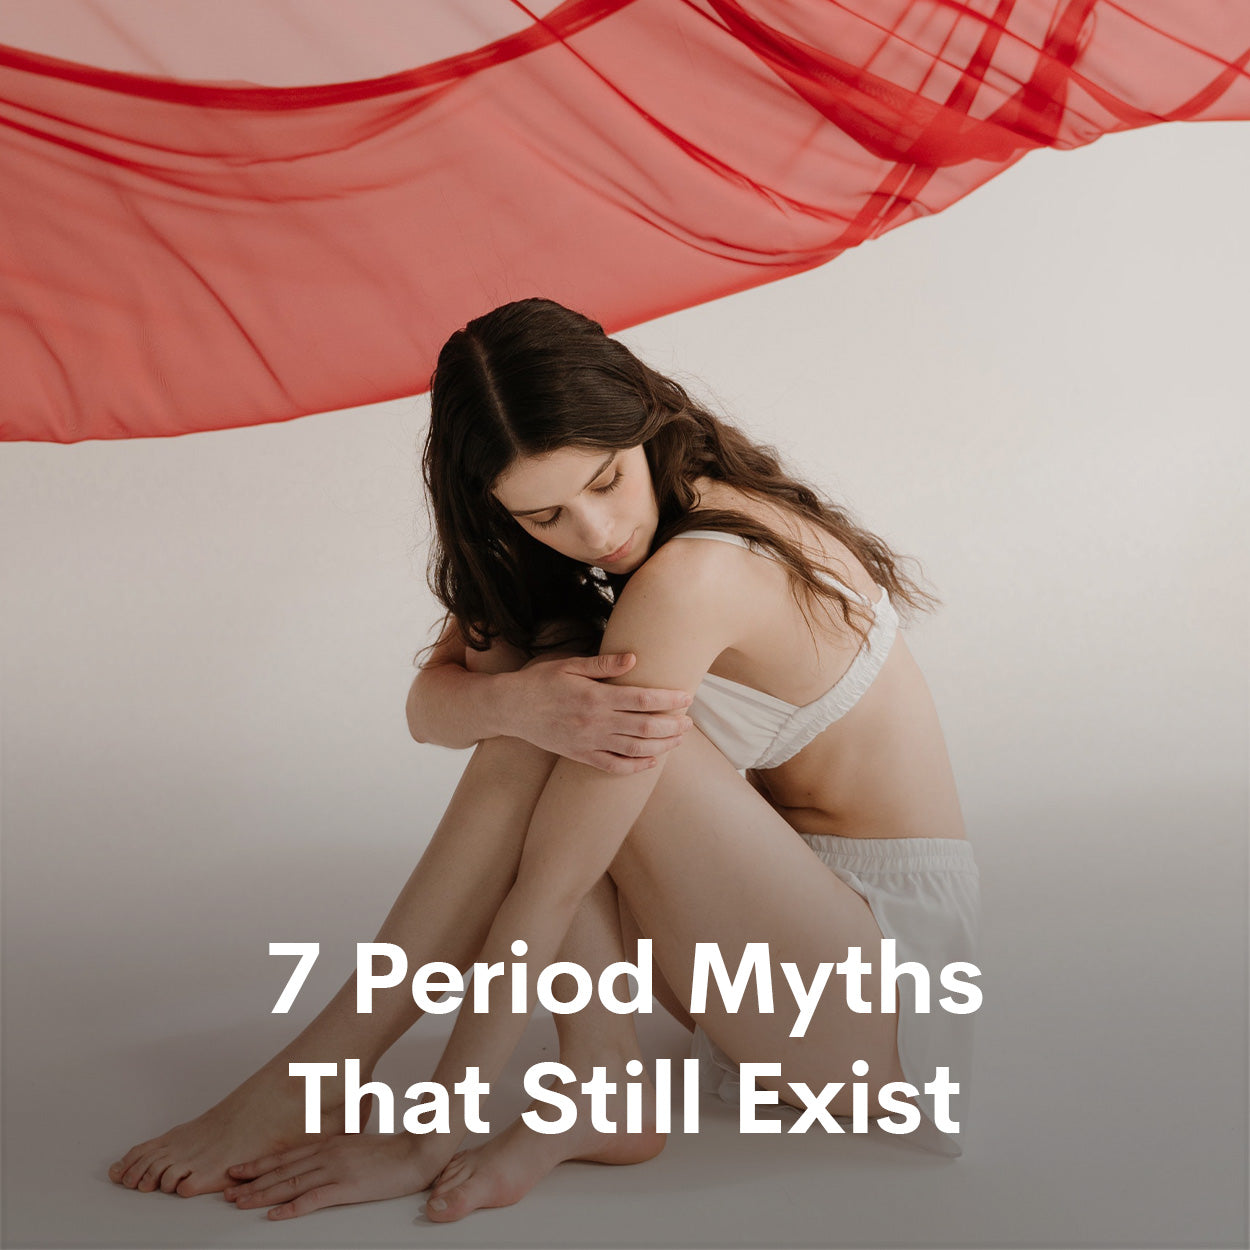 Debunking Period Myths: Menstrual cycles are in sync with moon cycles - Nua